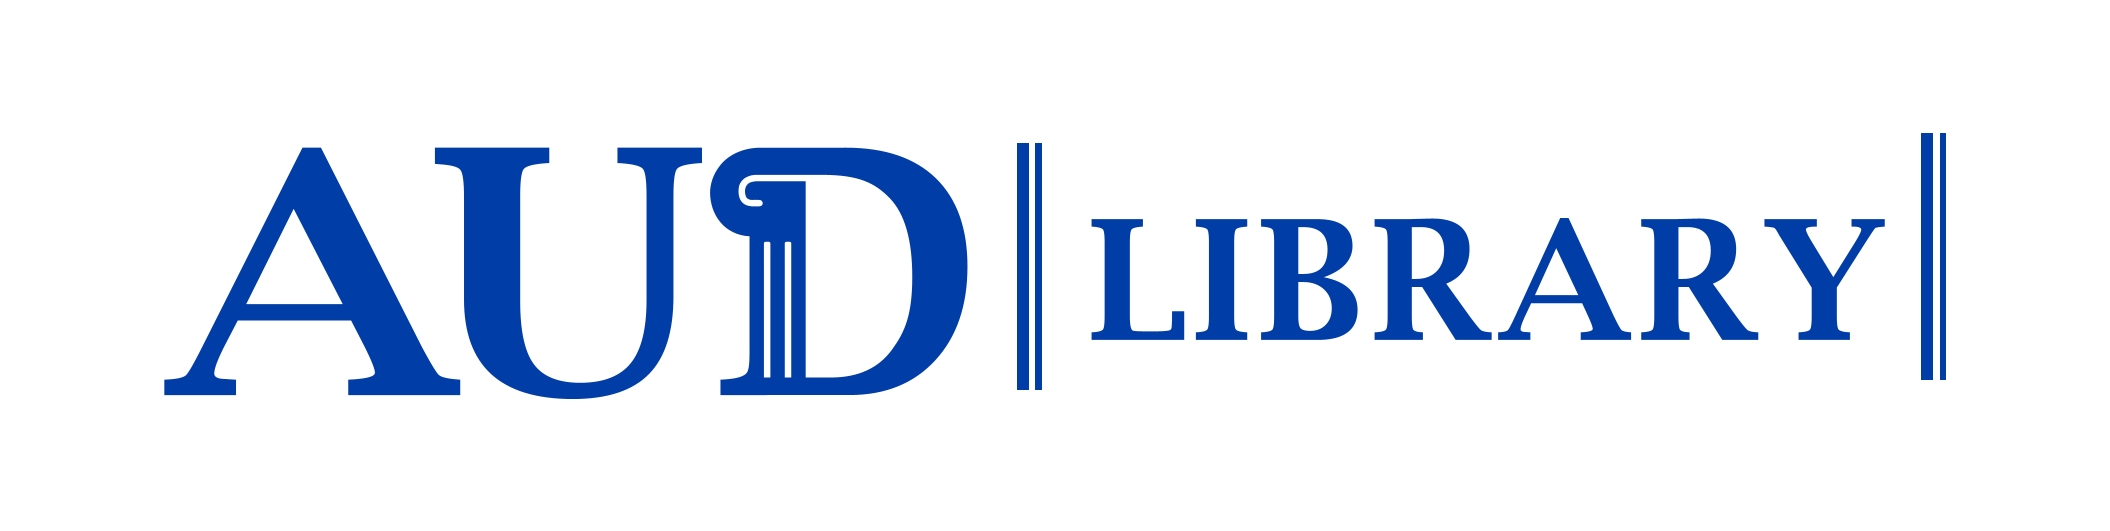 AUD Library logo 2 Blue.png